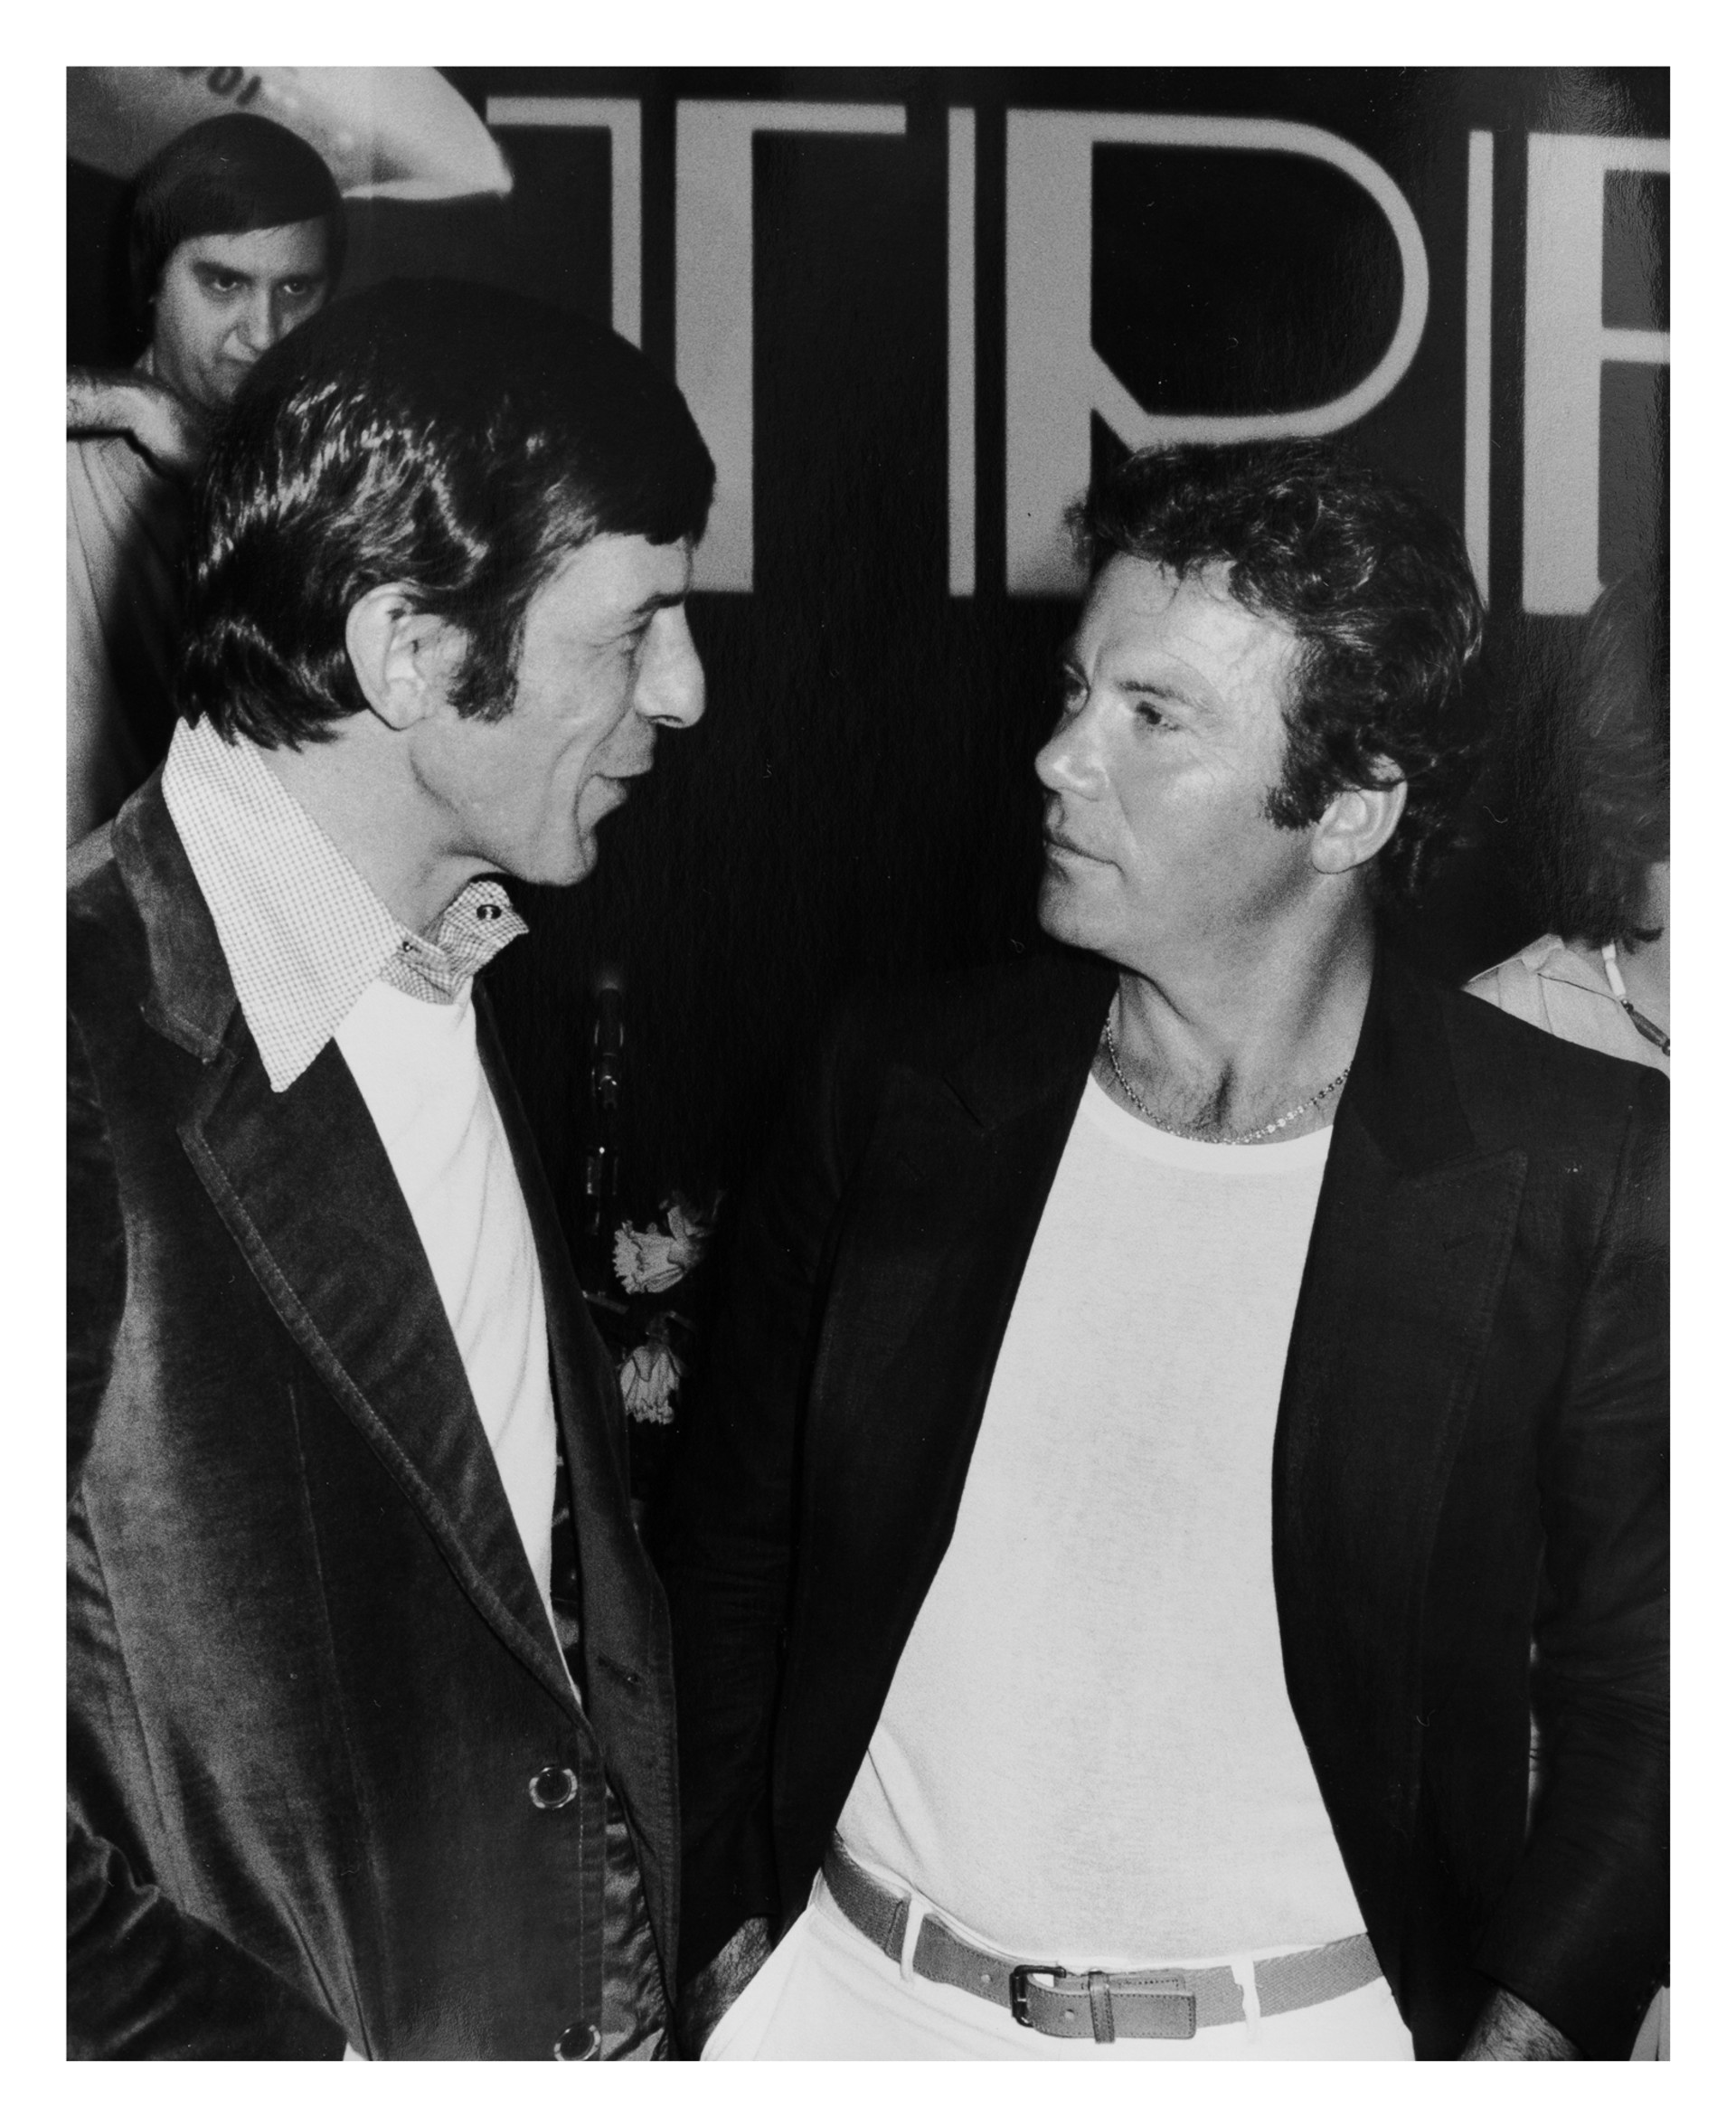 William Shatner and Leonard Nimoy by Ron Galella